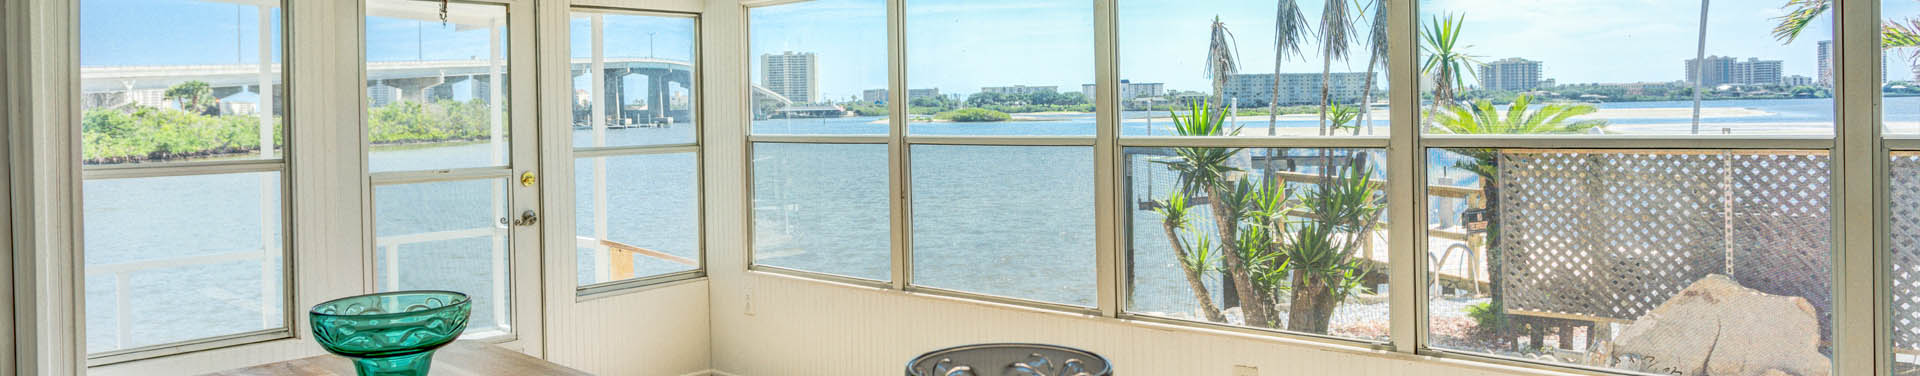 Photo of the view of the blue ocean and bridge over the water from inside a manufactured home through glass windows